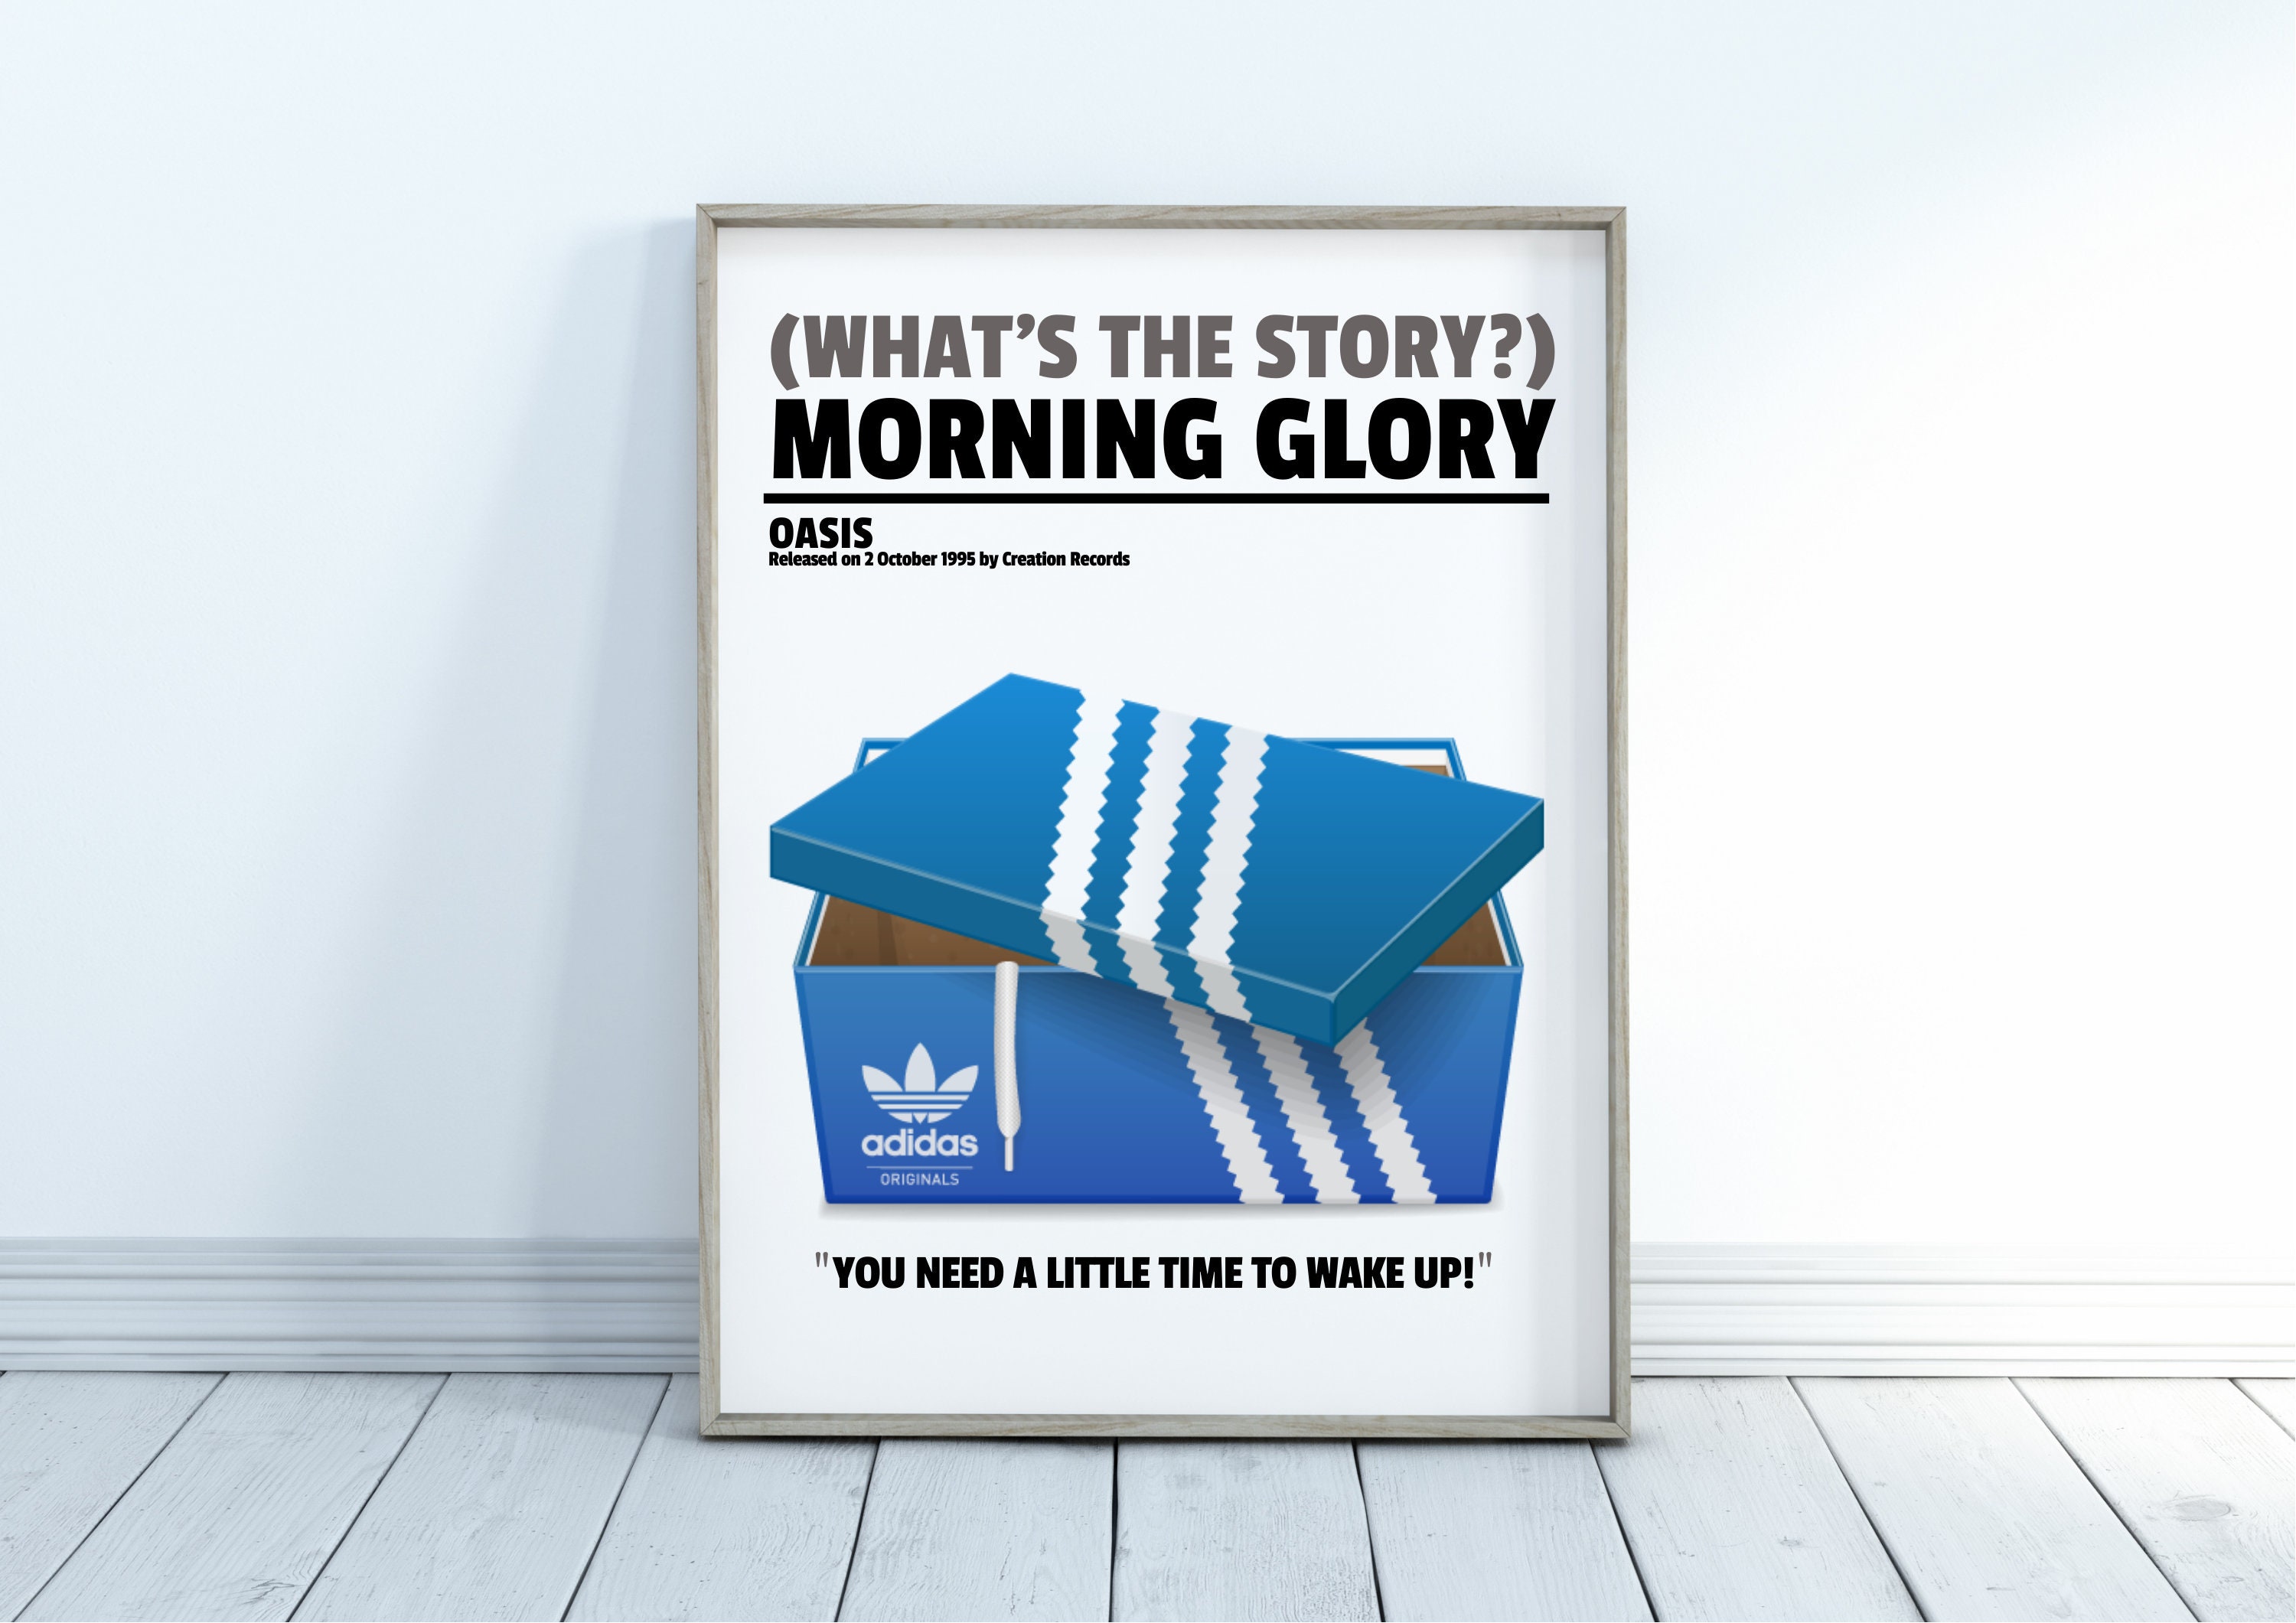 Recuento Exagerar Banquete What's the story morning glory oasis adidas wonderwall - Etsy España